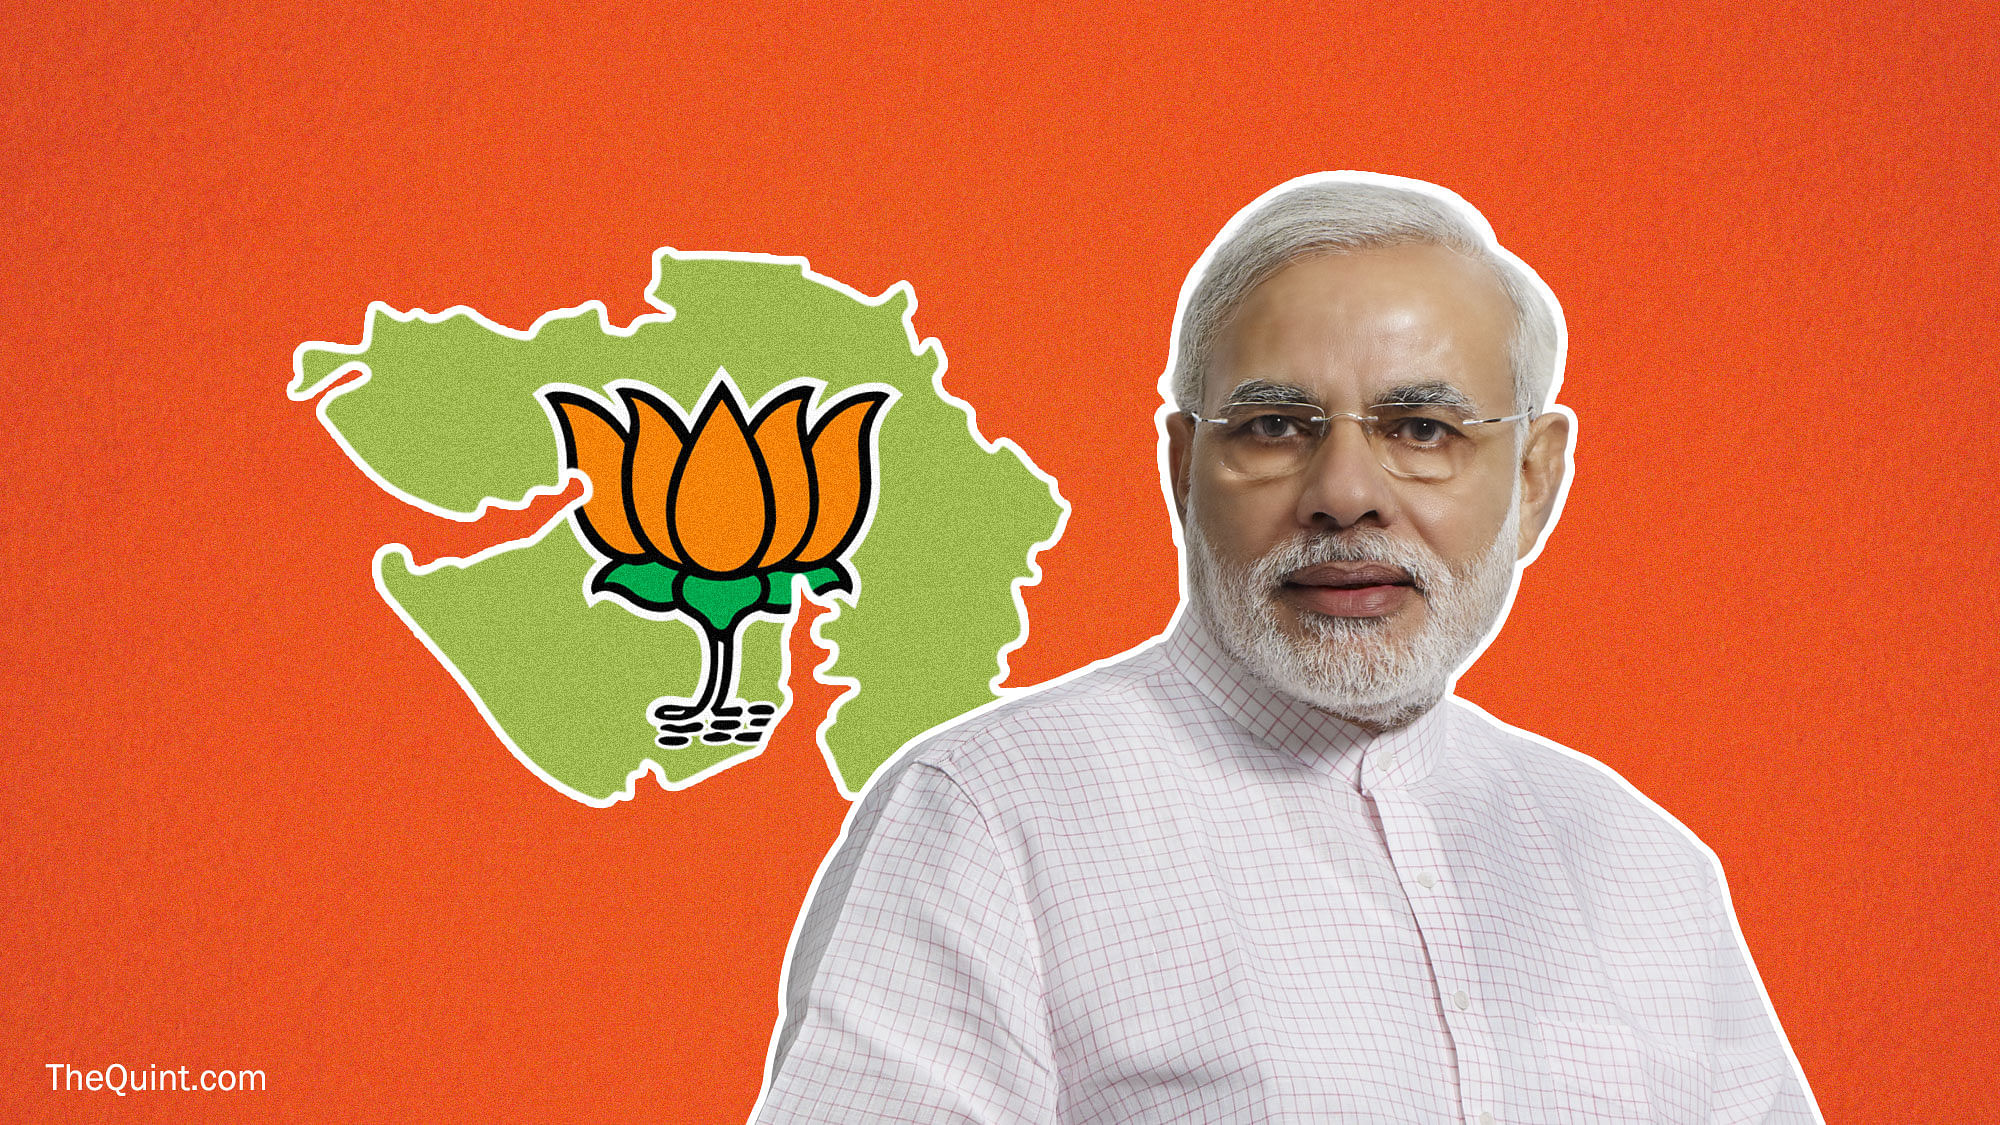 BJP doesn’t seem to be at ease in Narendra Modi’s home state.